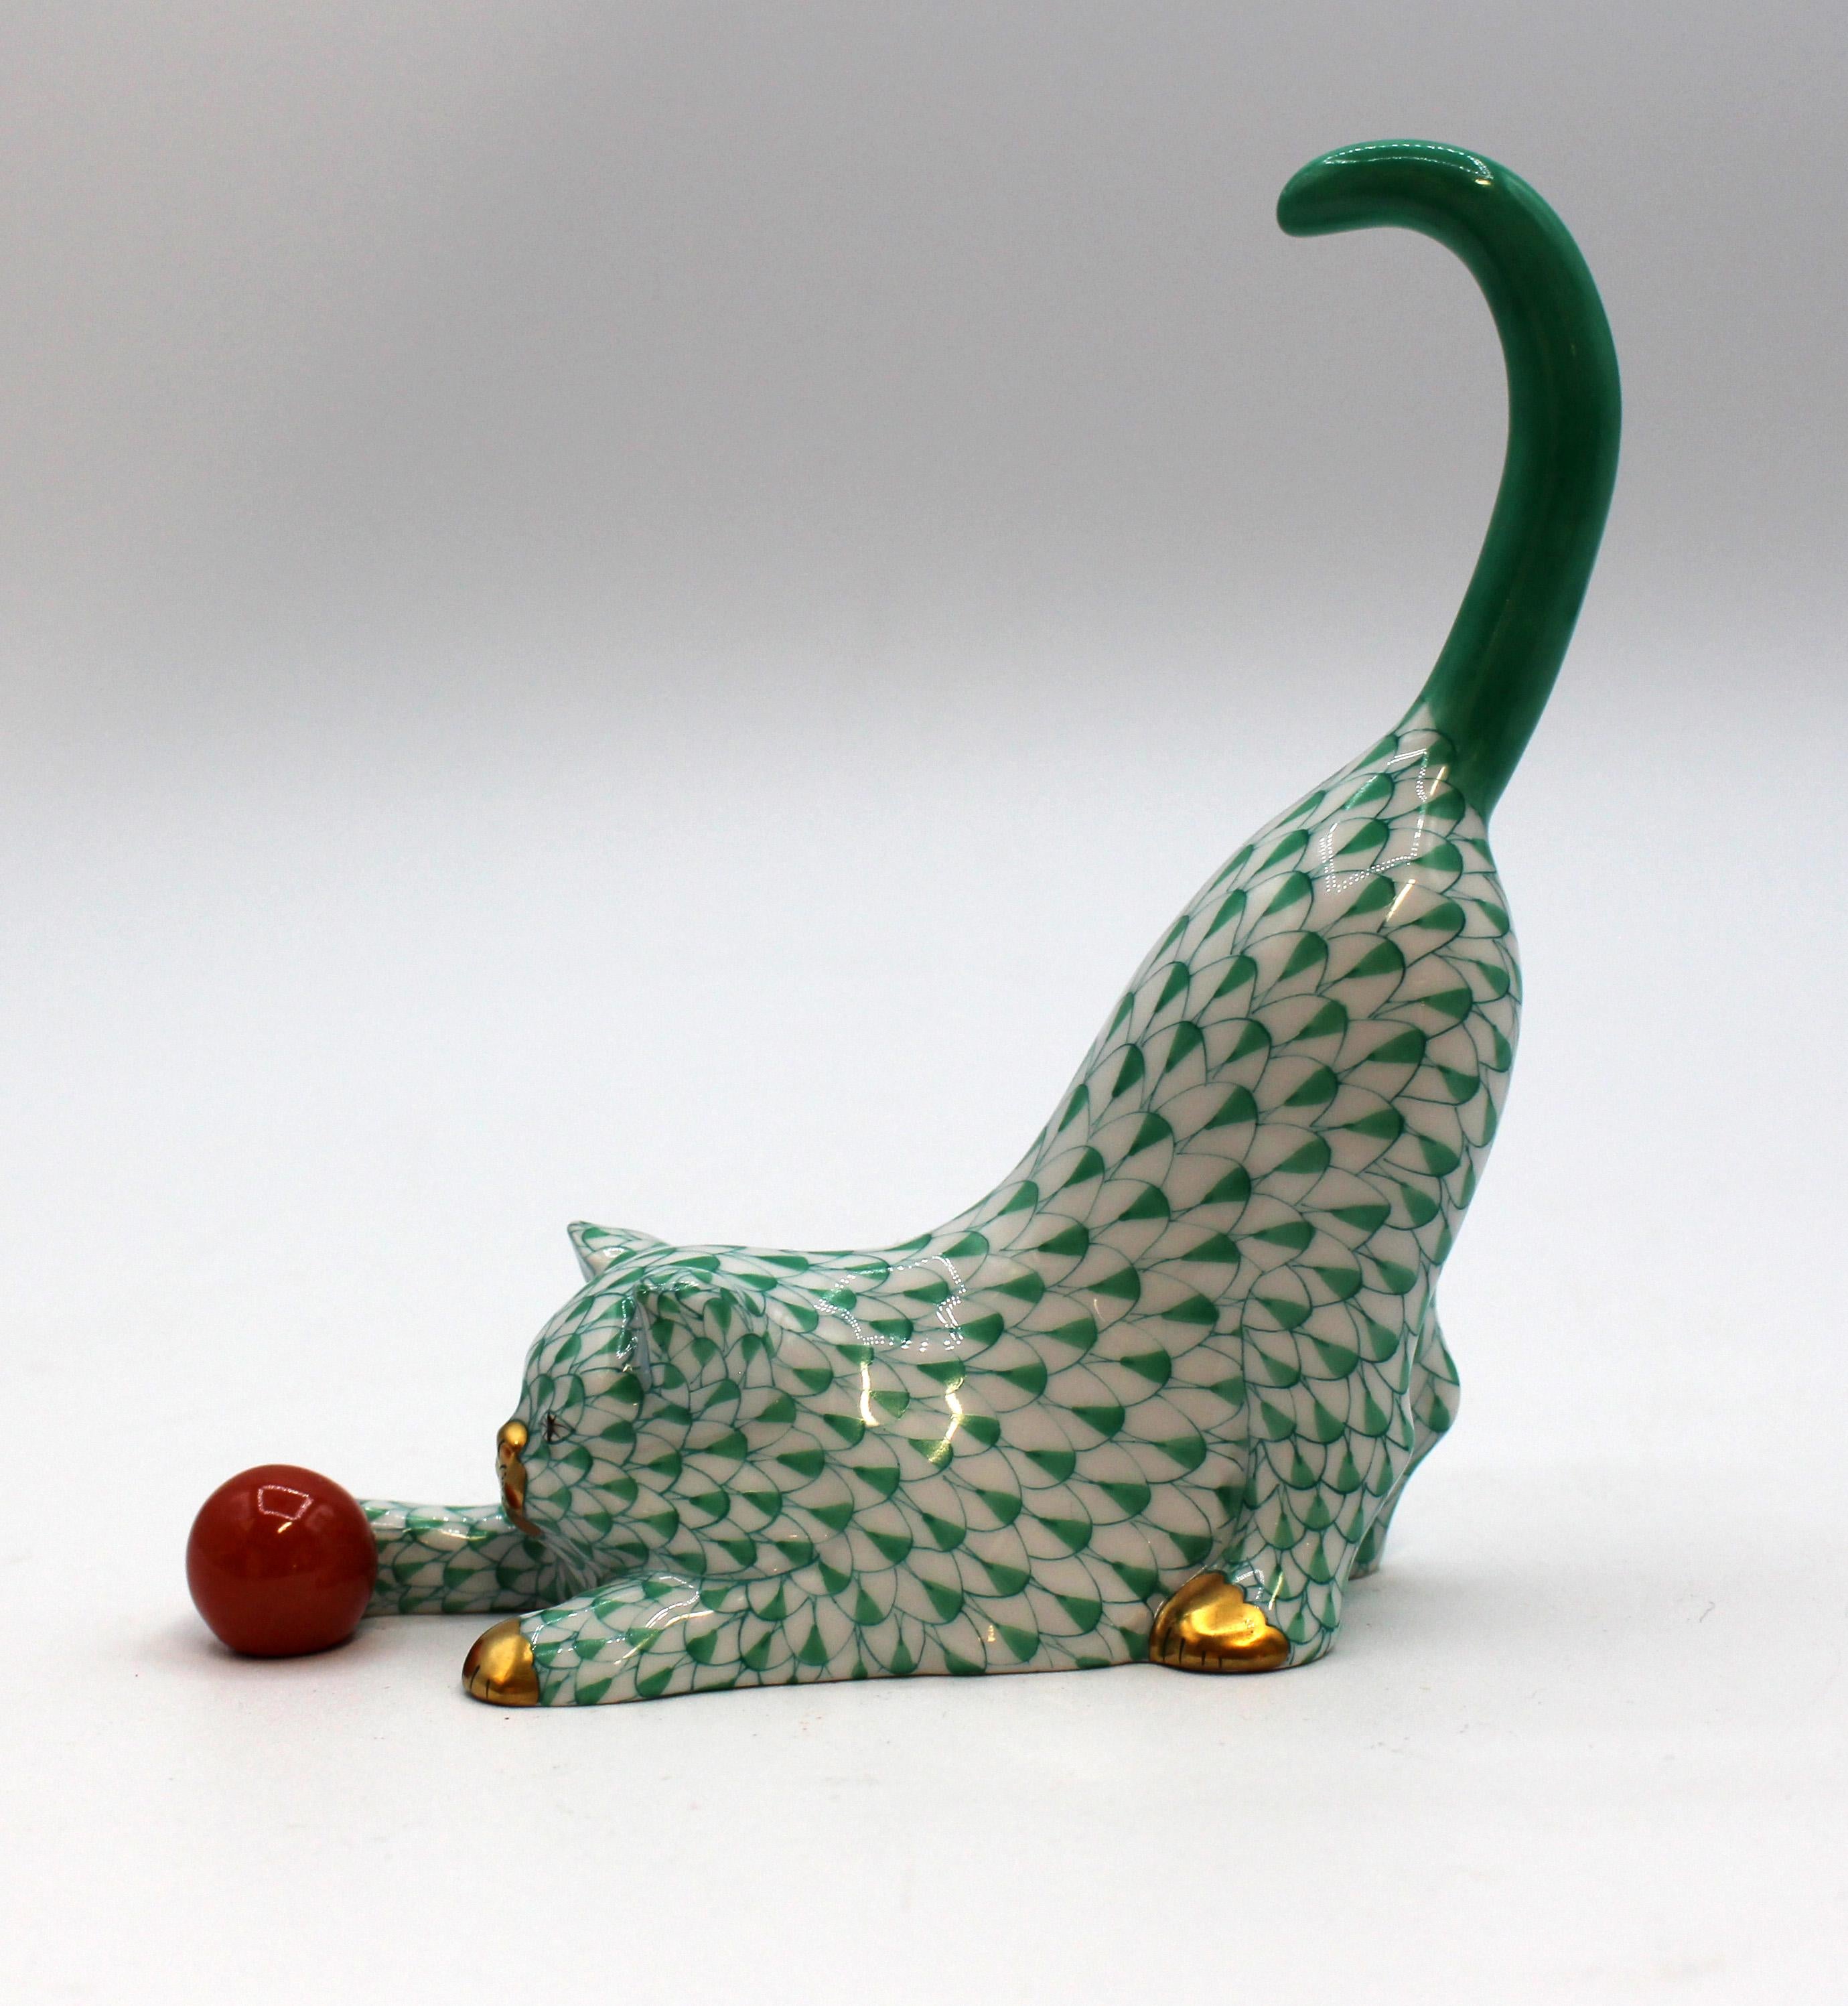 Vintage Herend green fishnet decoration cat with ball, gilt paws & nose. Standard blue mark with A22 and impressed mark with numbers. Measures: 1 3/4